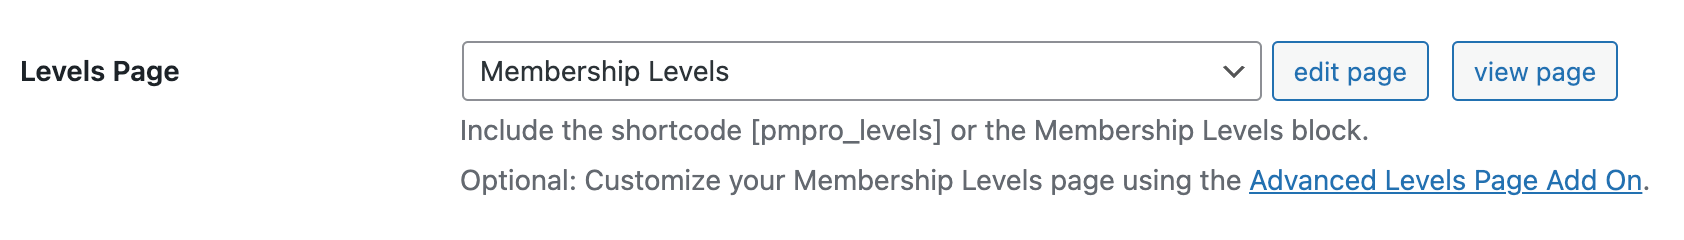 Setting for the Levels Page in the Memberships > Settings > Pages screen of the WordPress admin